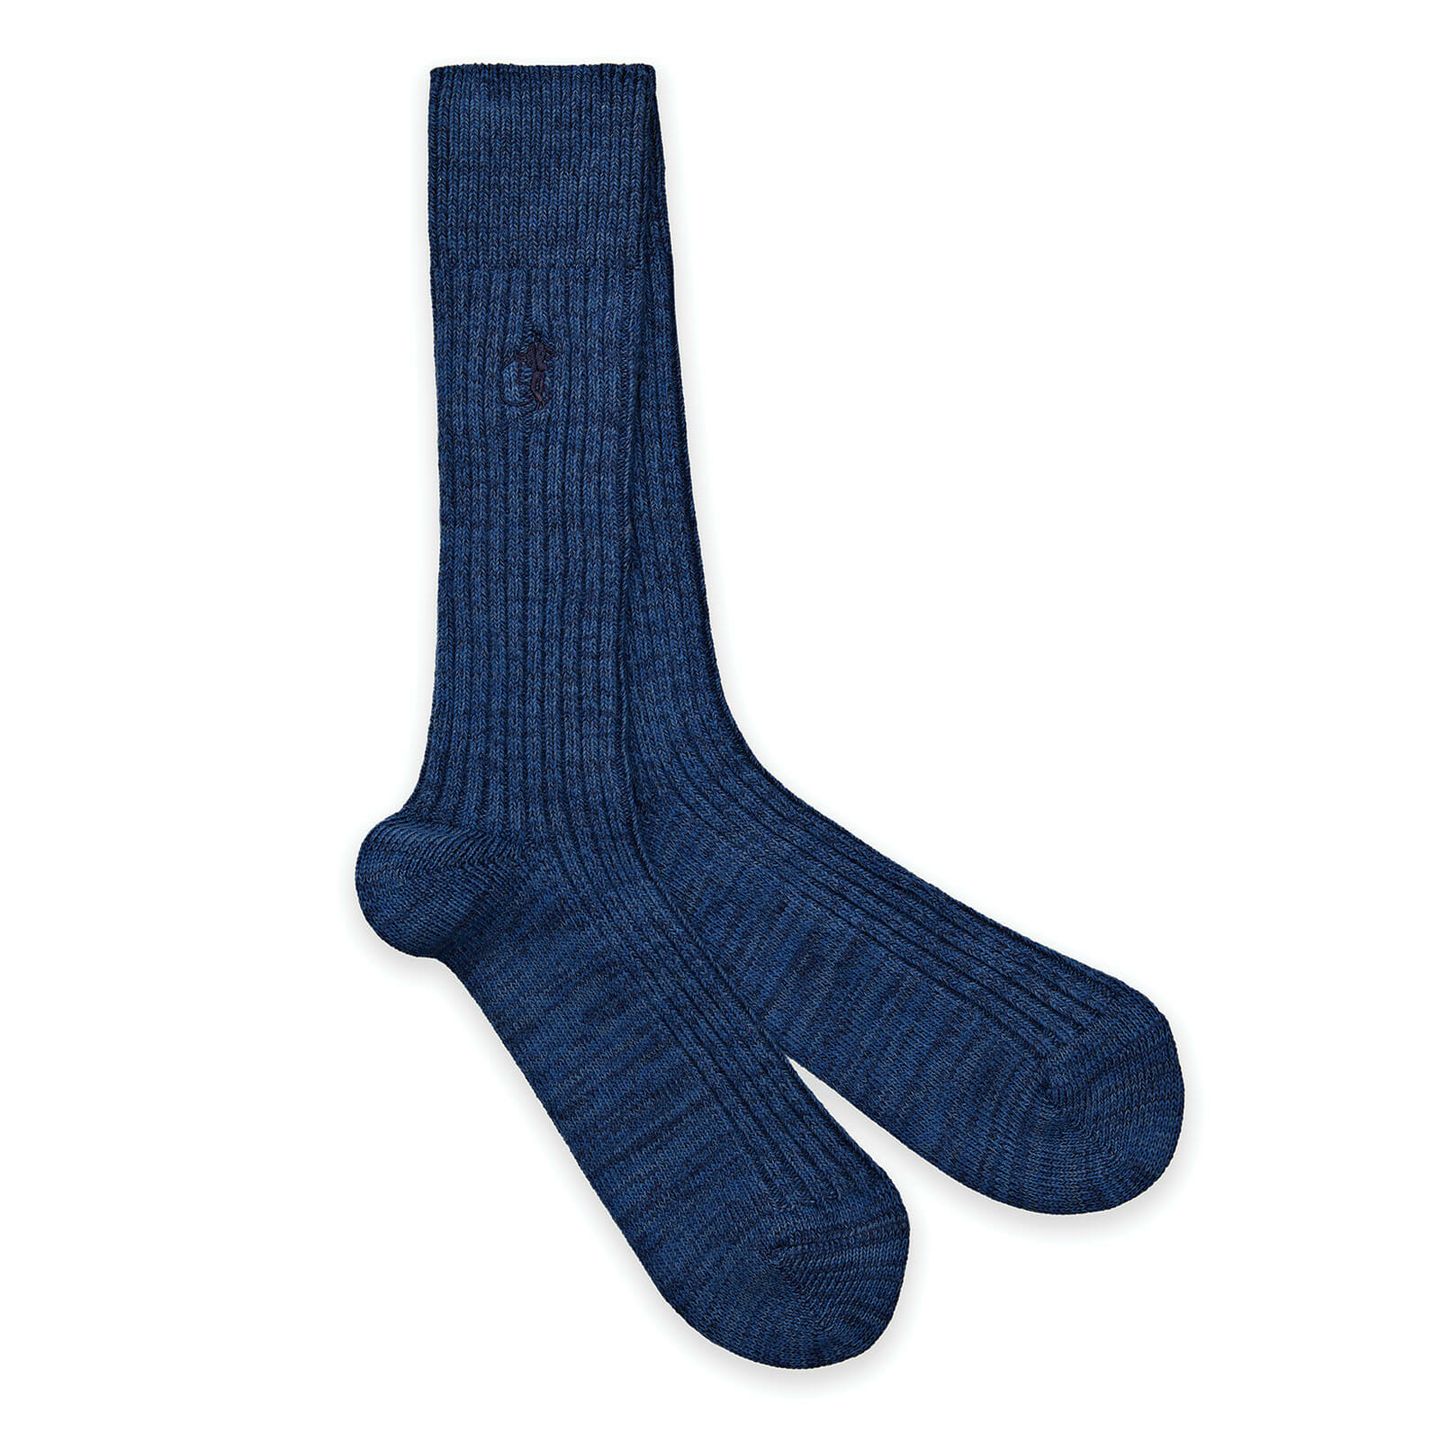 A pair of dark blue socks with a white background